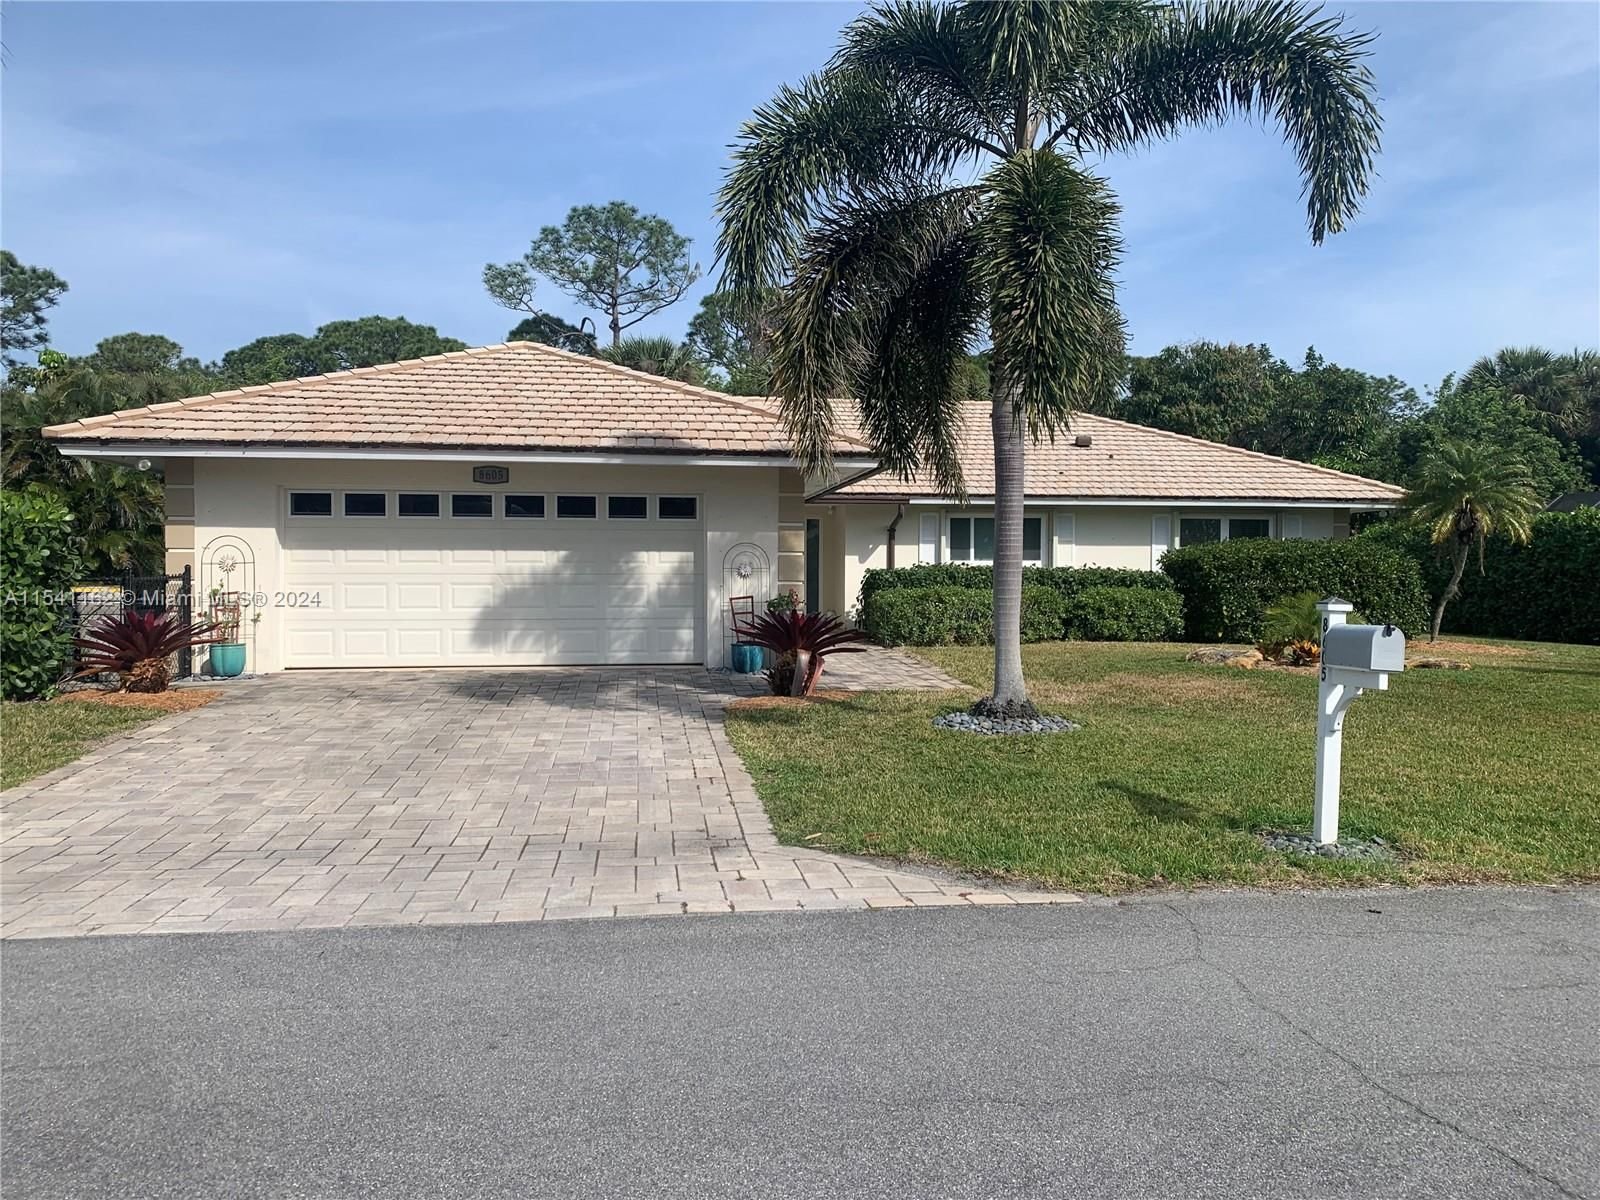 Real estate property located at 8605 Gulfstream Pl, Martin County, THE SOUNDINGS, Hobe Sound, FL